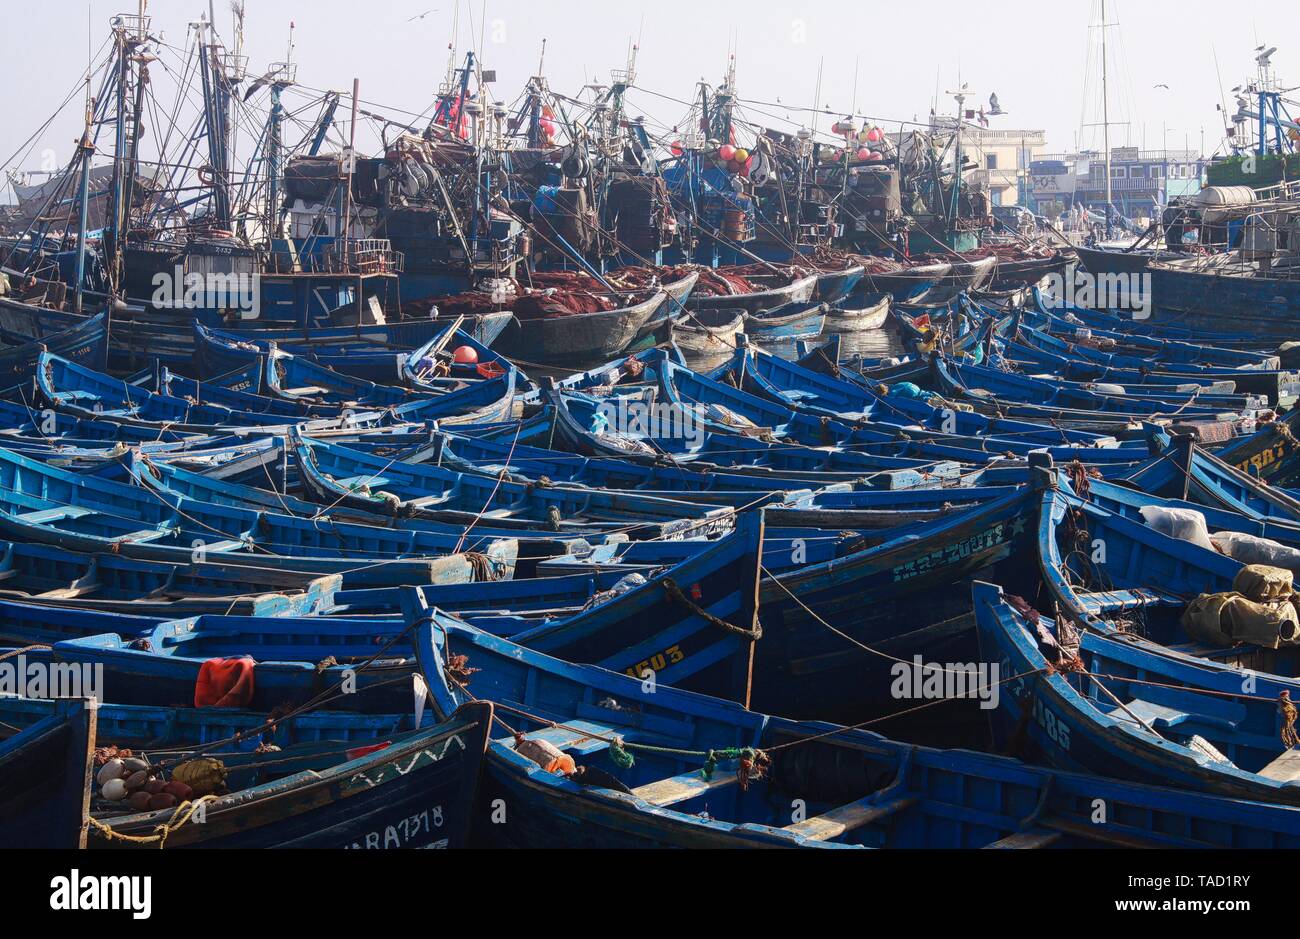 ESSAOUIRA, MOROCCO - SEPTEMBER 29. 2011: Countless blue fishing boats squeezed together in an utterly cramped harbor Stock Photo